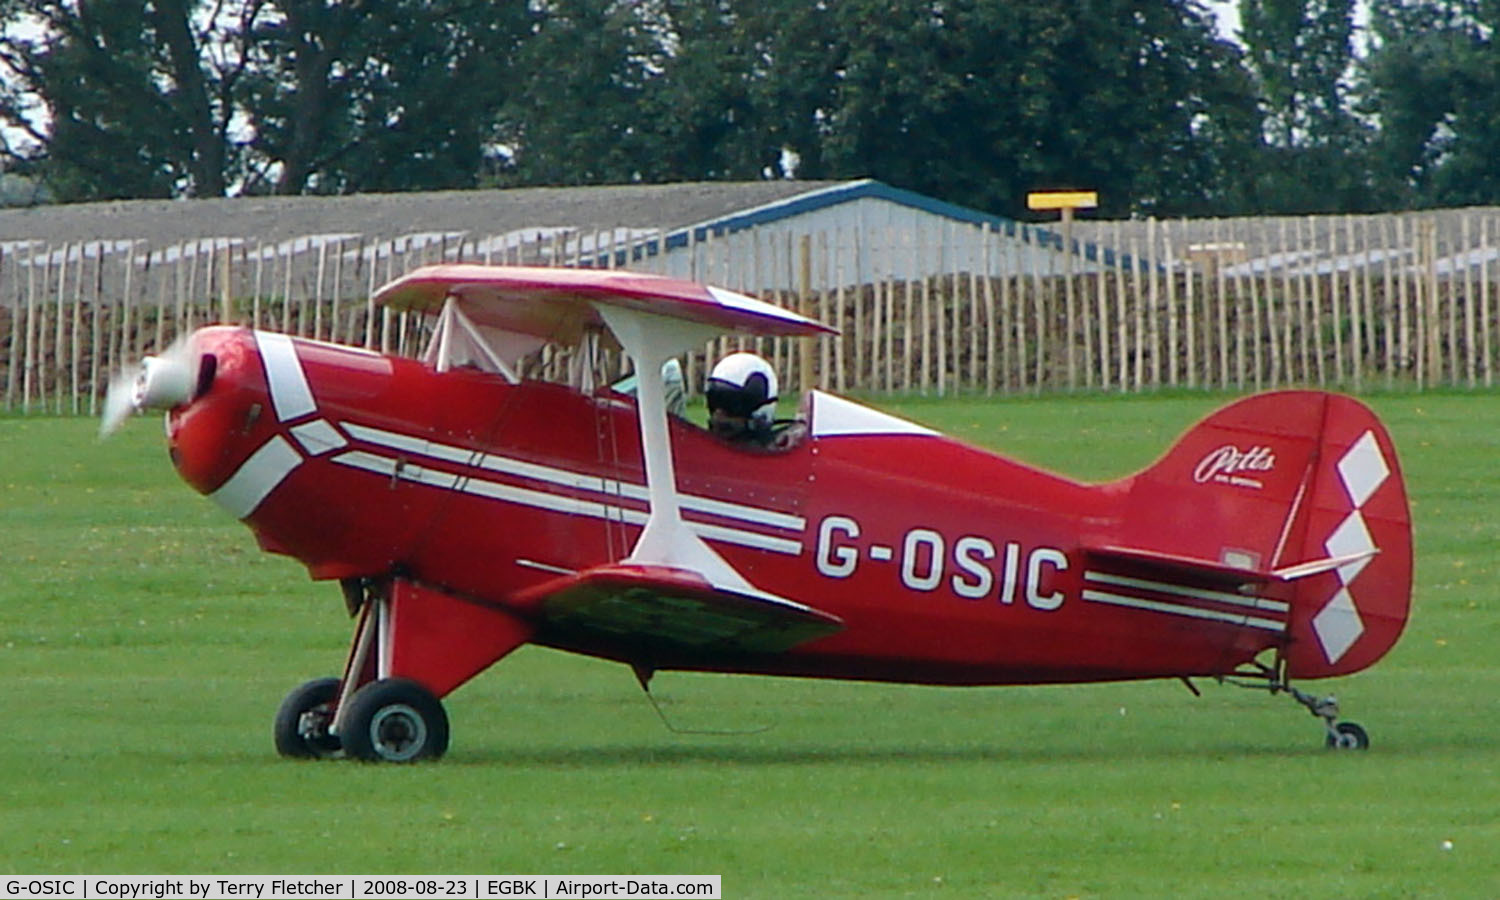 G-OSIC, 1977 Pitts S-1C Special C/N 1921-77, Visitor to Sywell on 2008 Ragwing Fly-in day